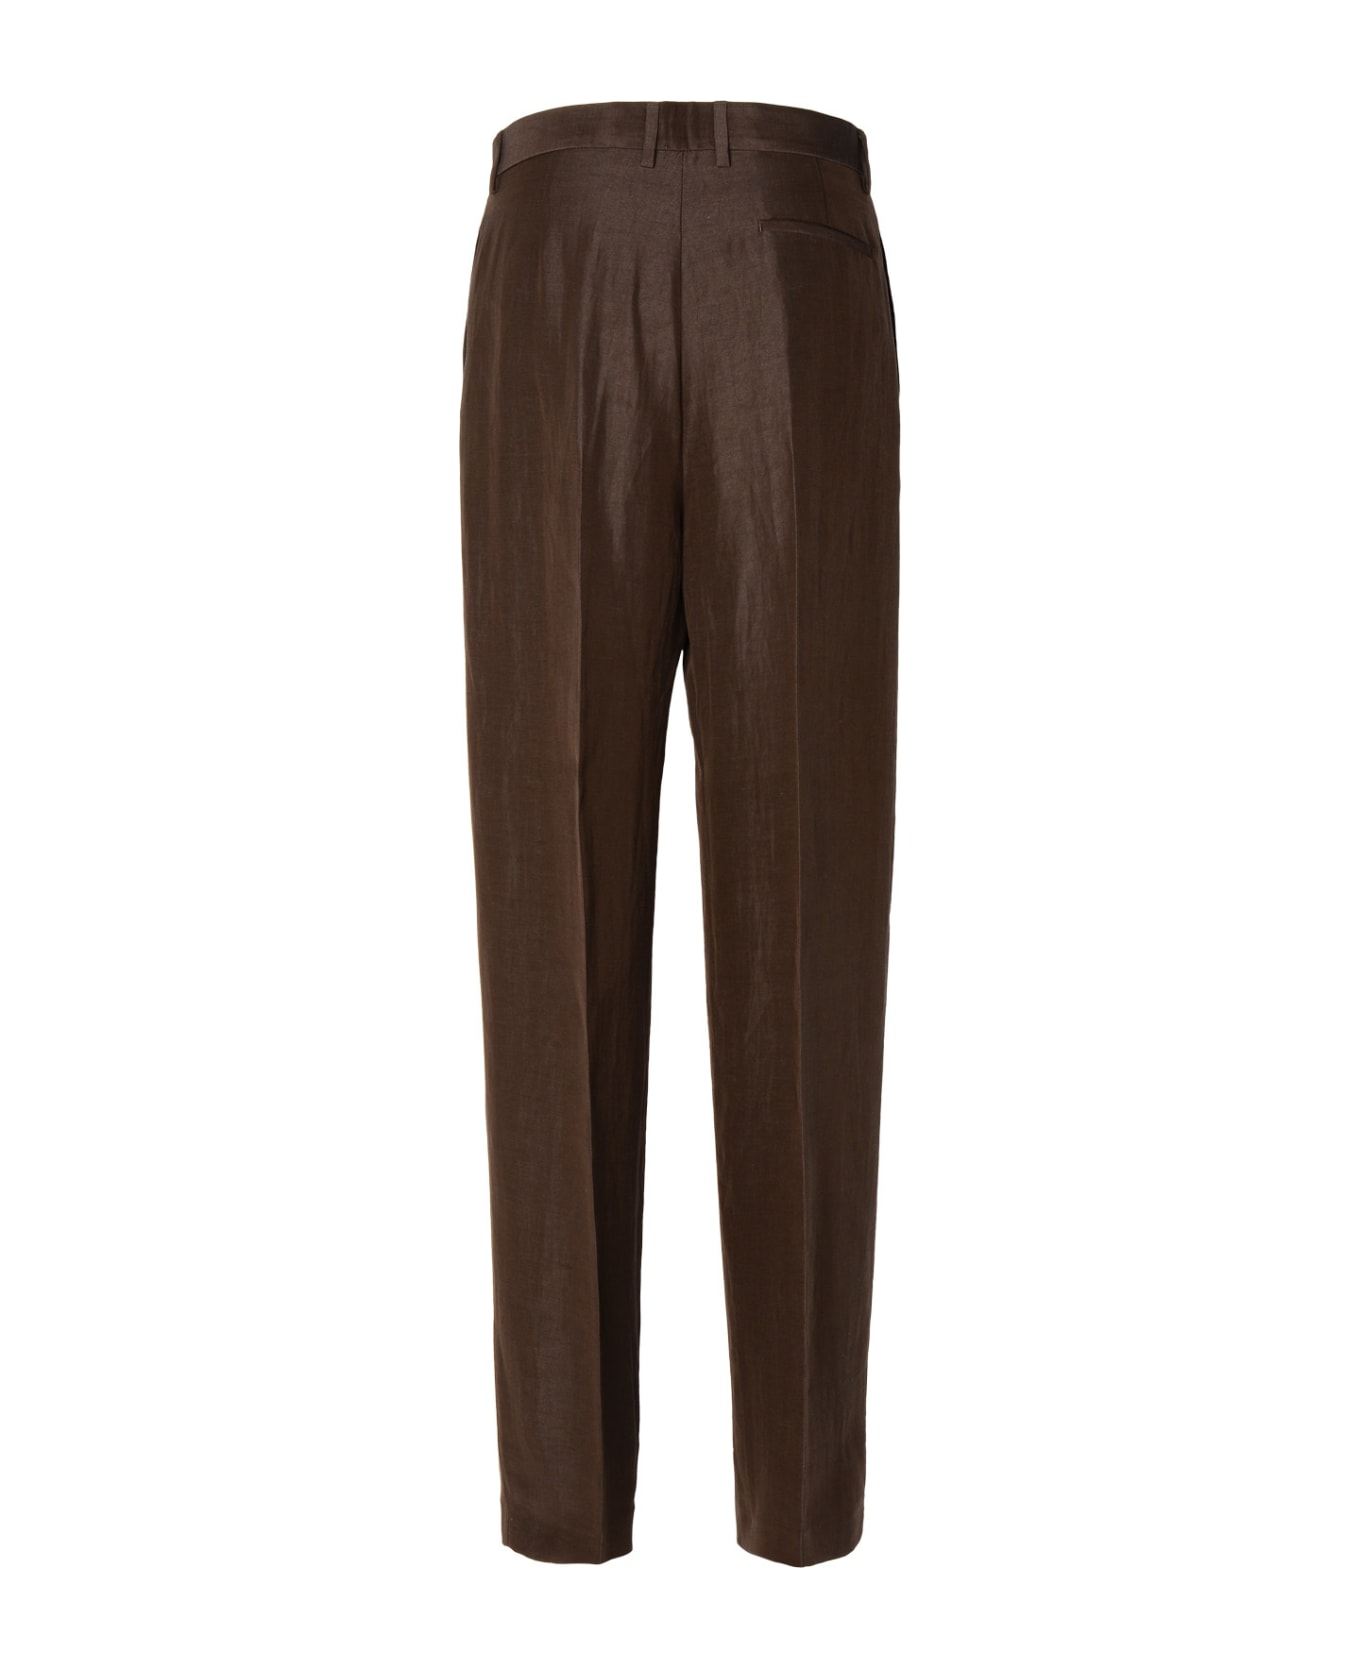 MSGM Brown Linen Blend Trousers - Dark brown ボトムス